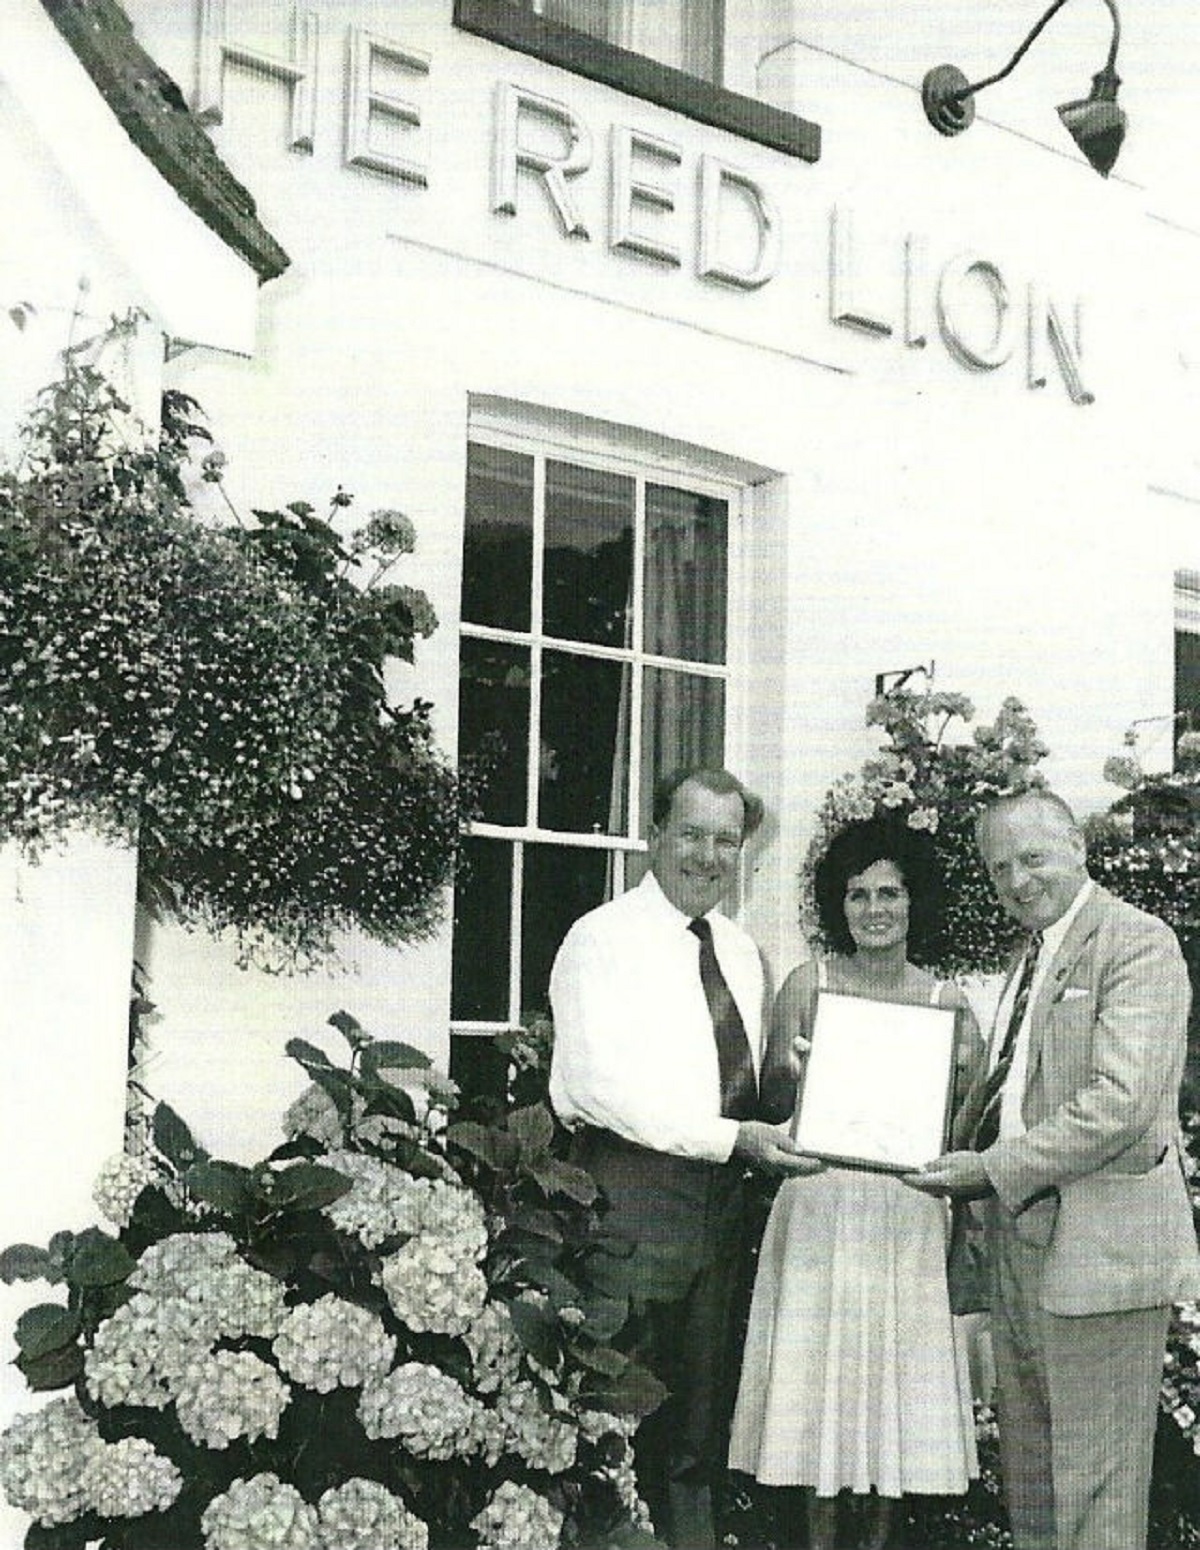 Roar of approval - The Red Lion was situated on The Green, in Great Bentley. This pub closed in 1996